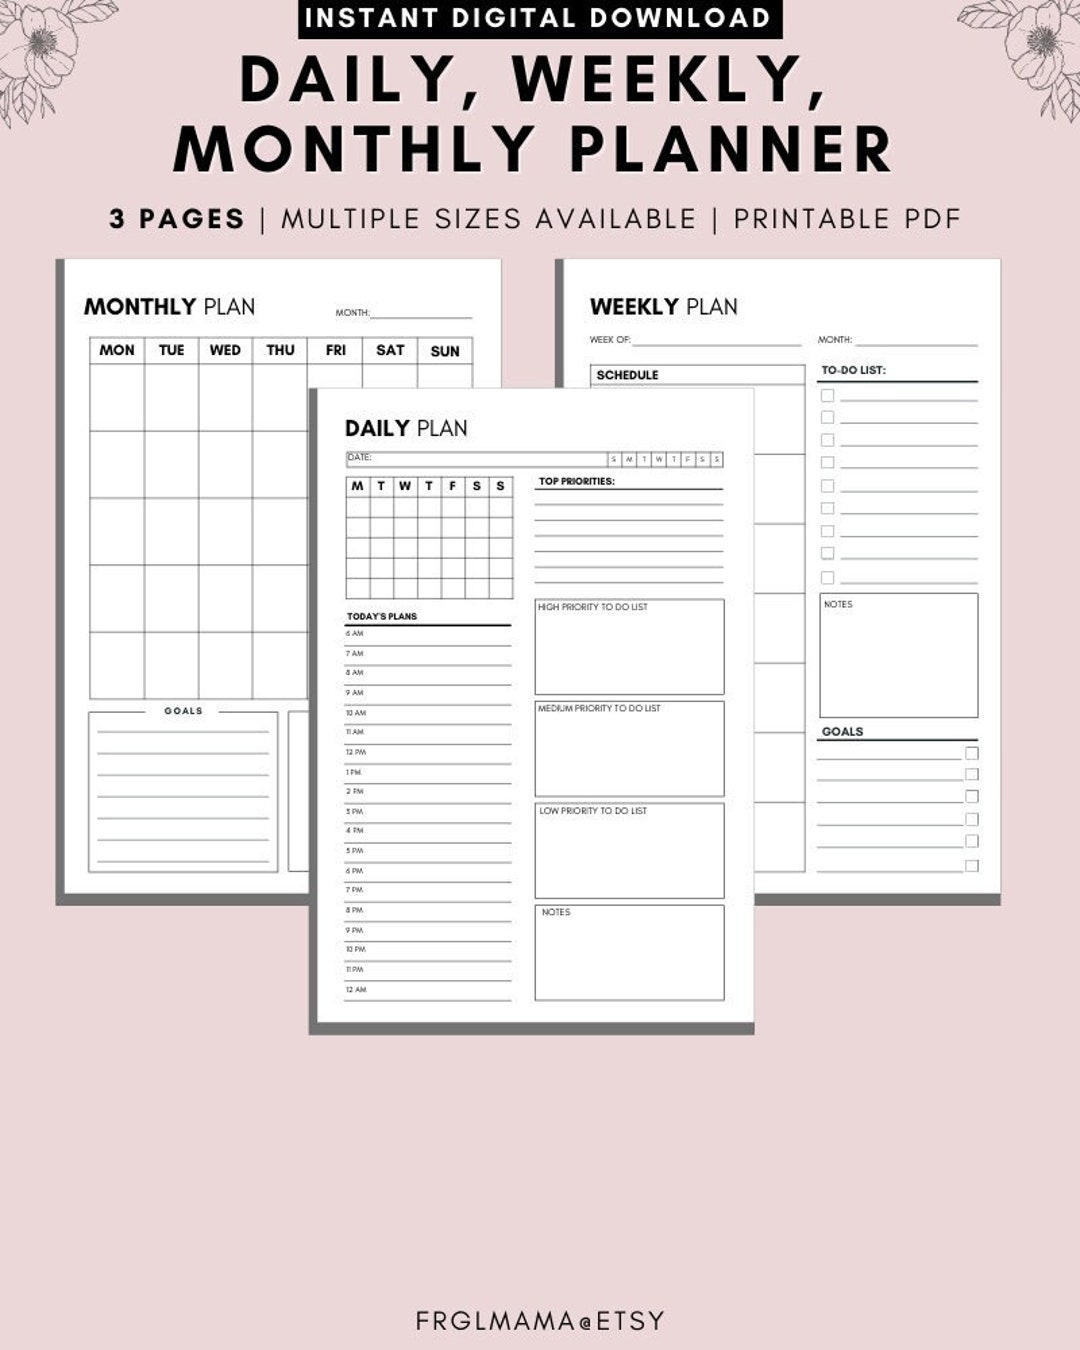 Daily Planner Tracker Weekly Planner Monthly Planner - Etsy